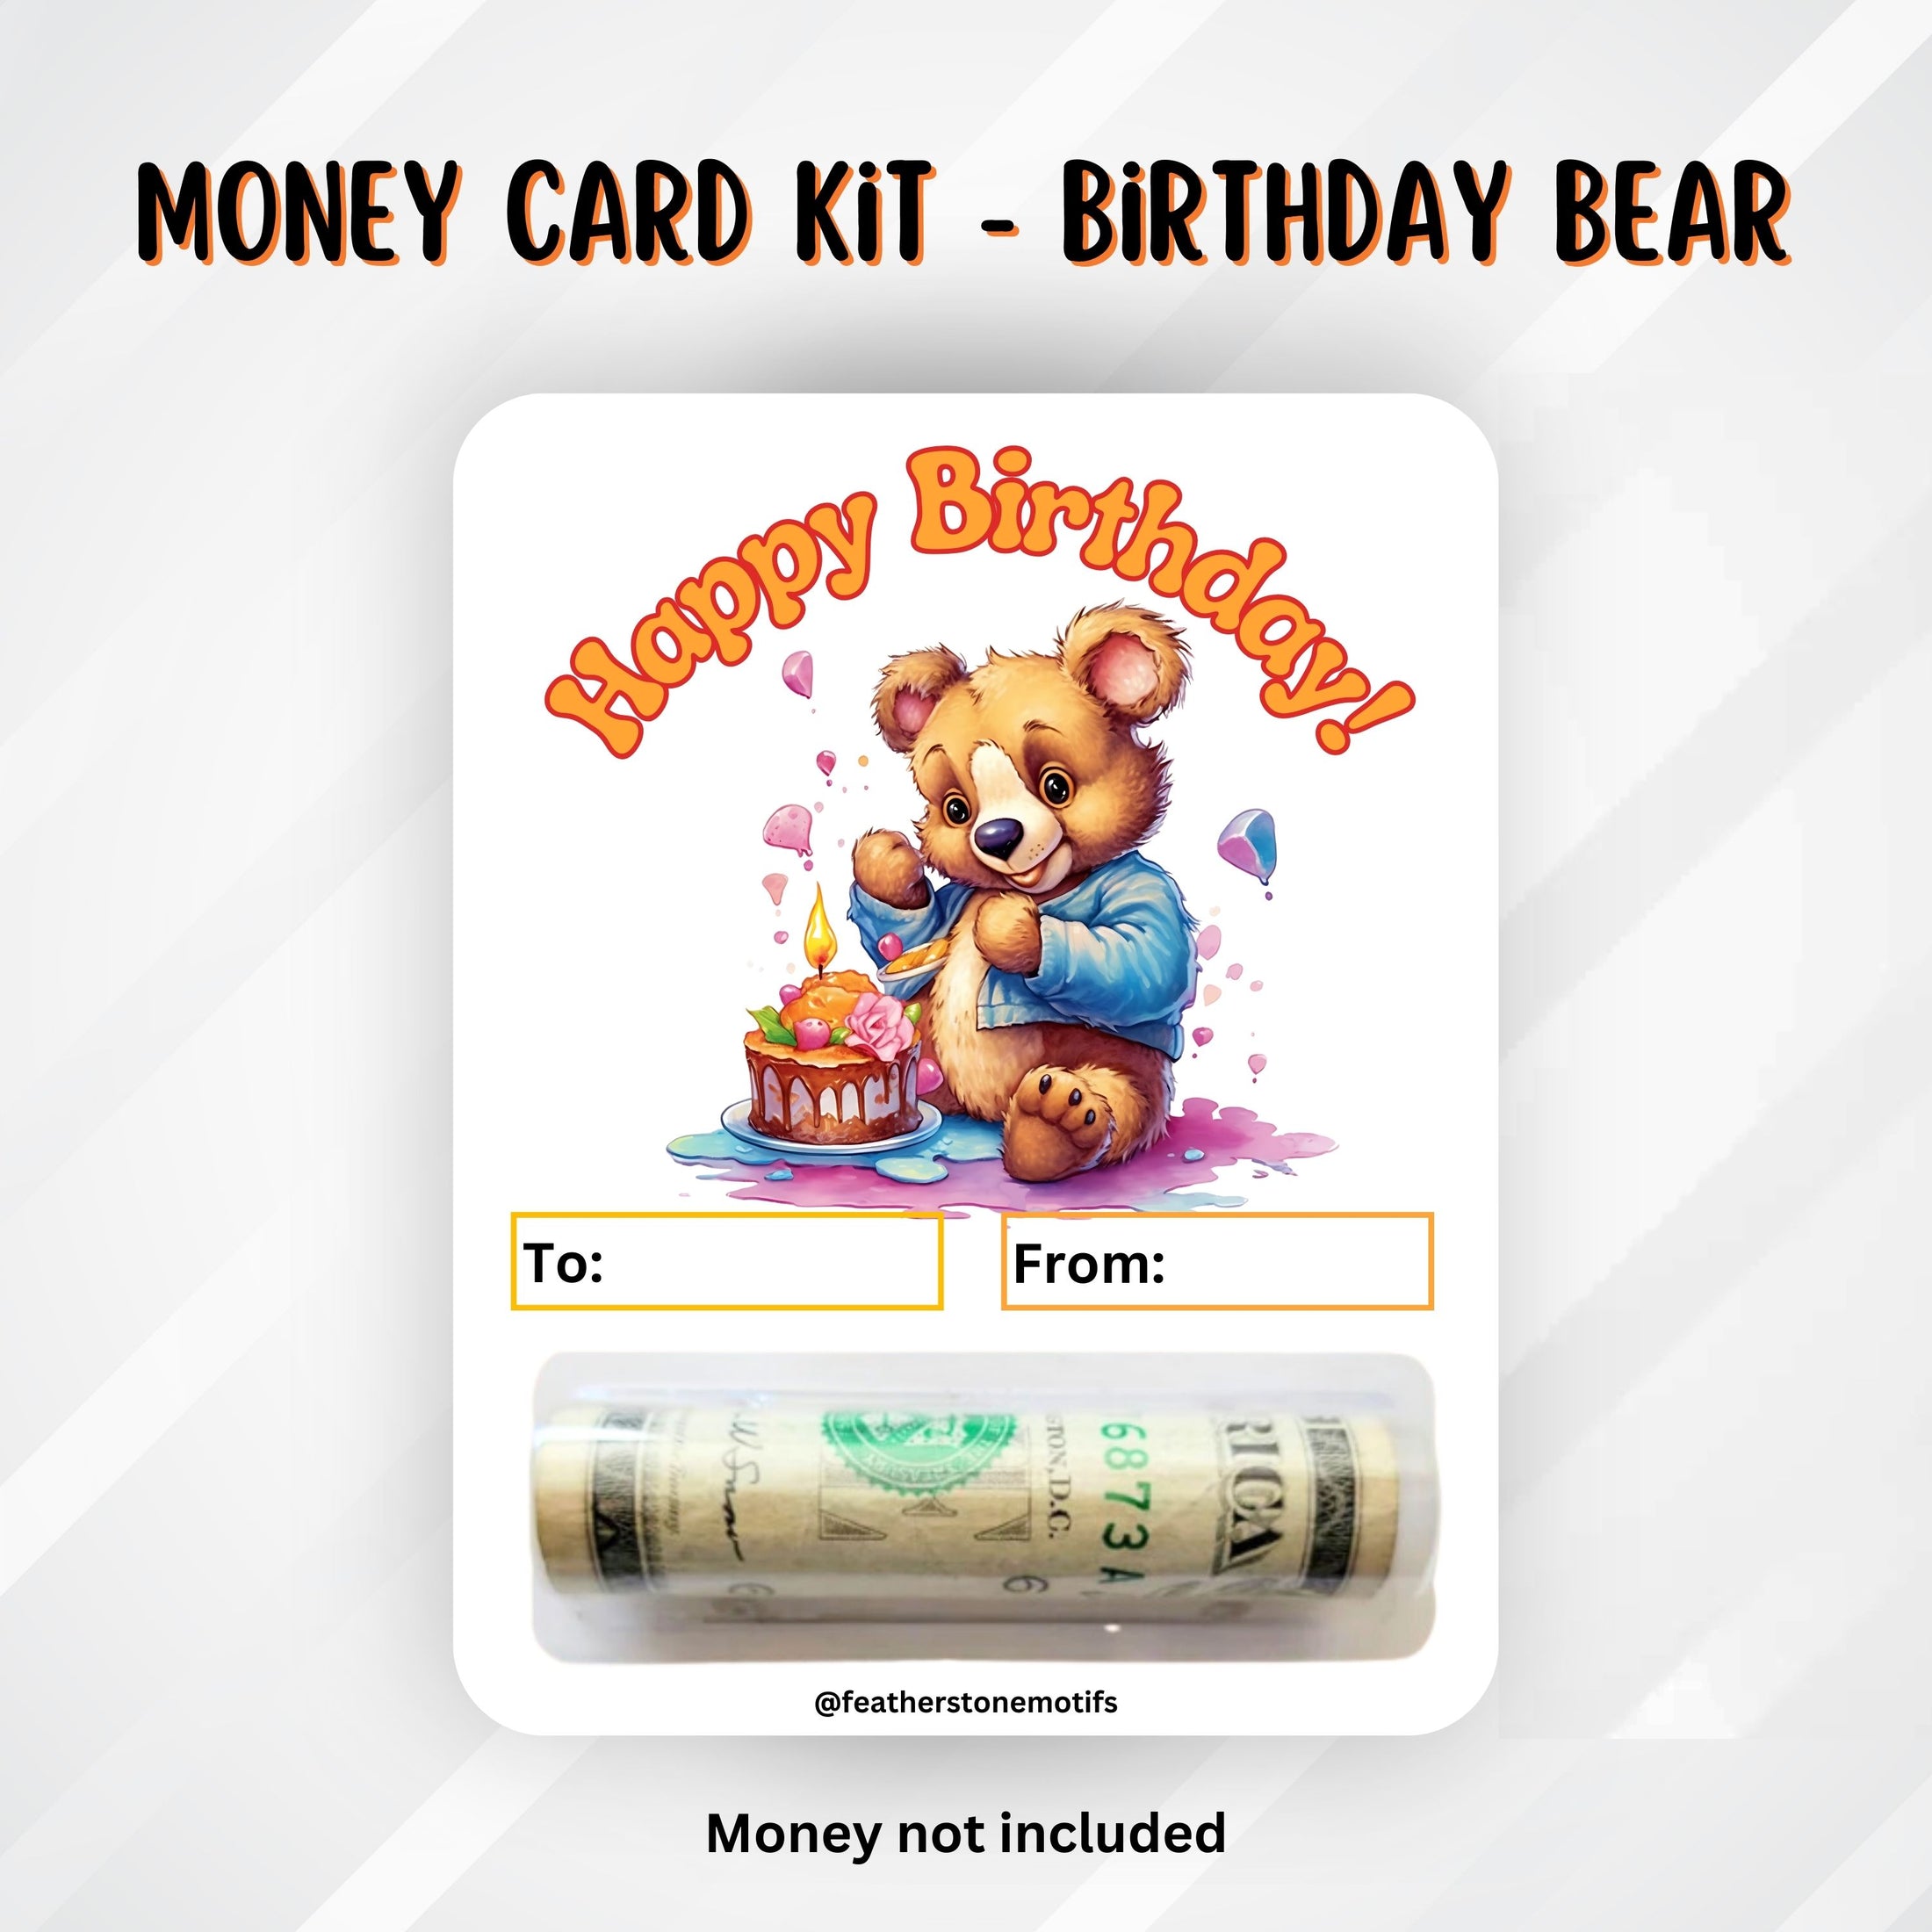 This image show the money tube attached to the Bear Birthday money card.